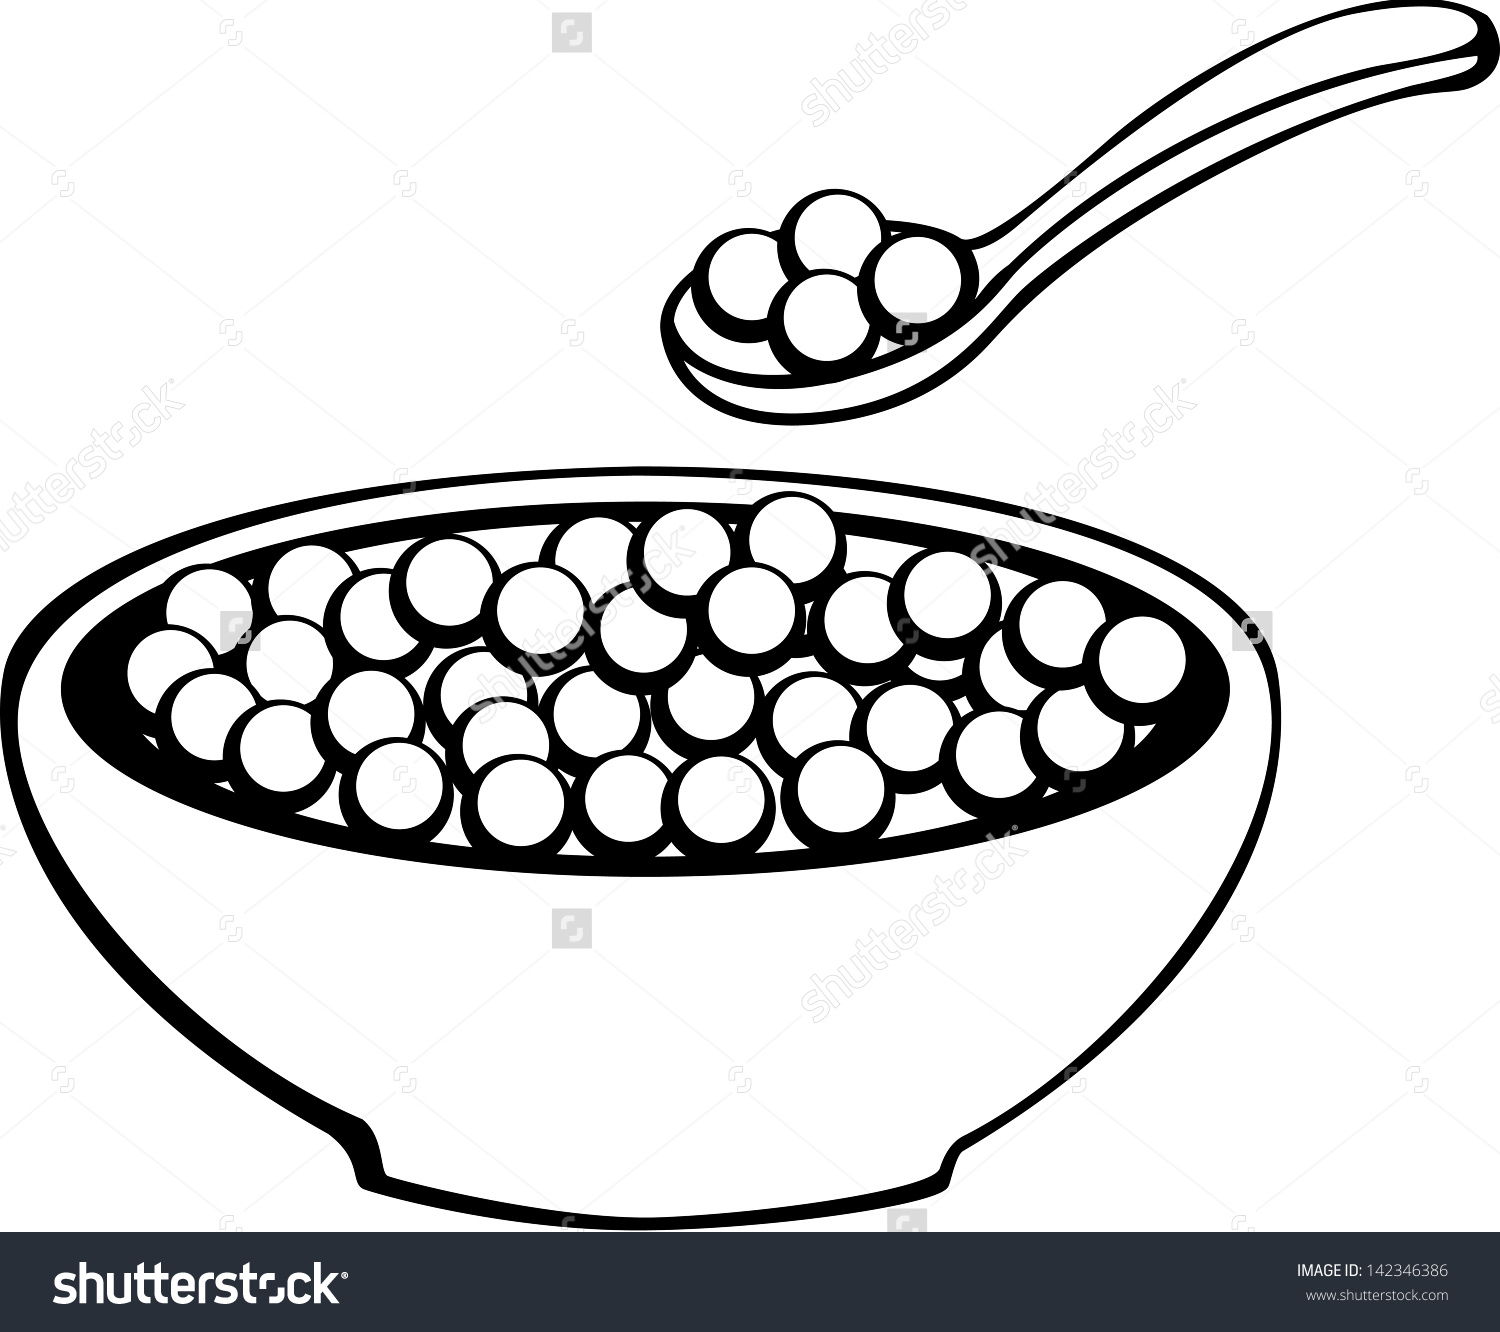 cereal Bowl Colouring Pages (